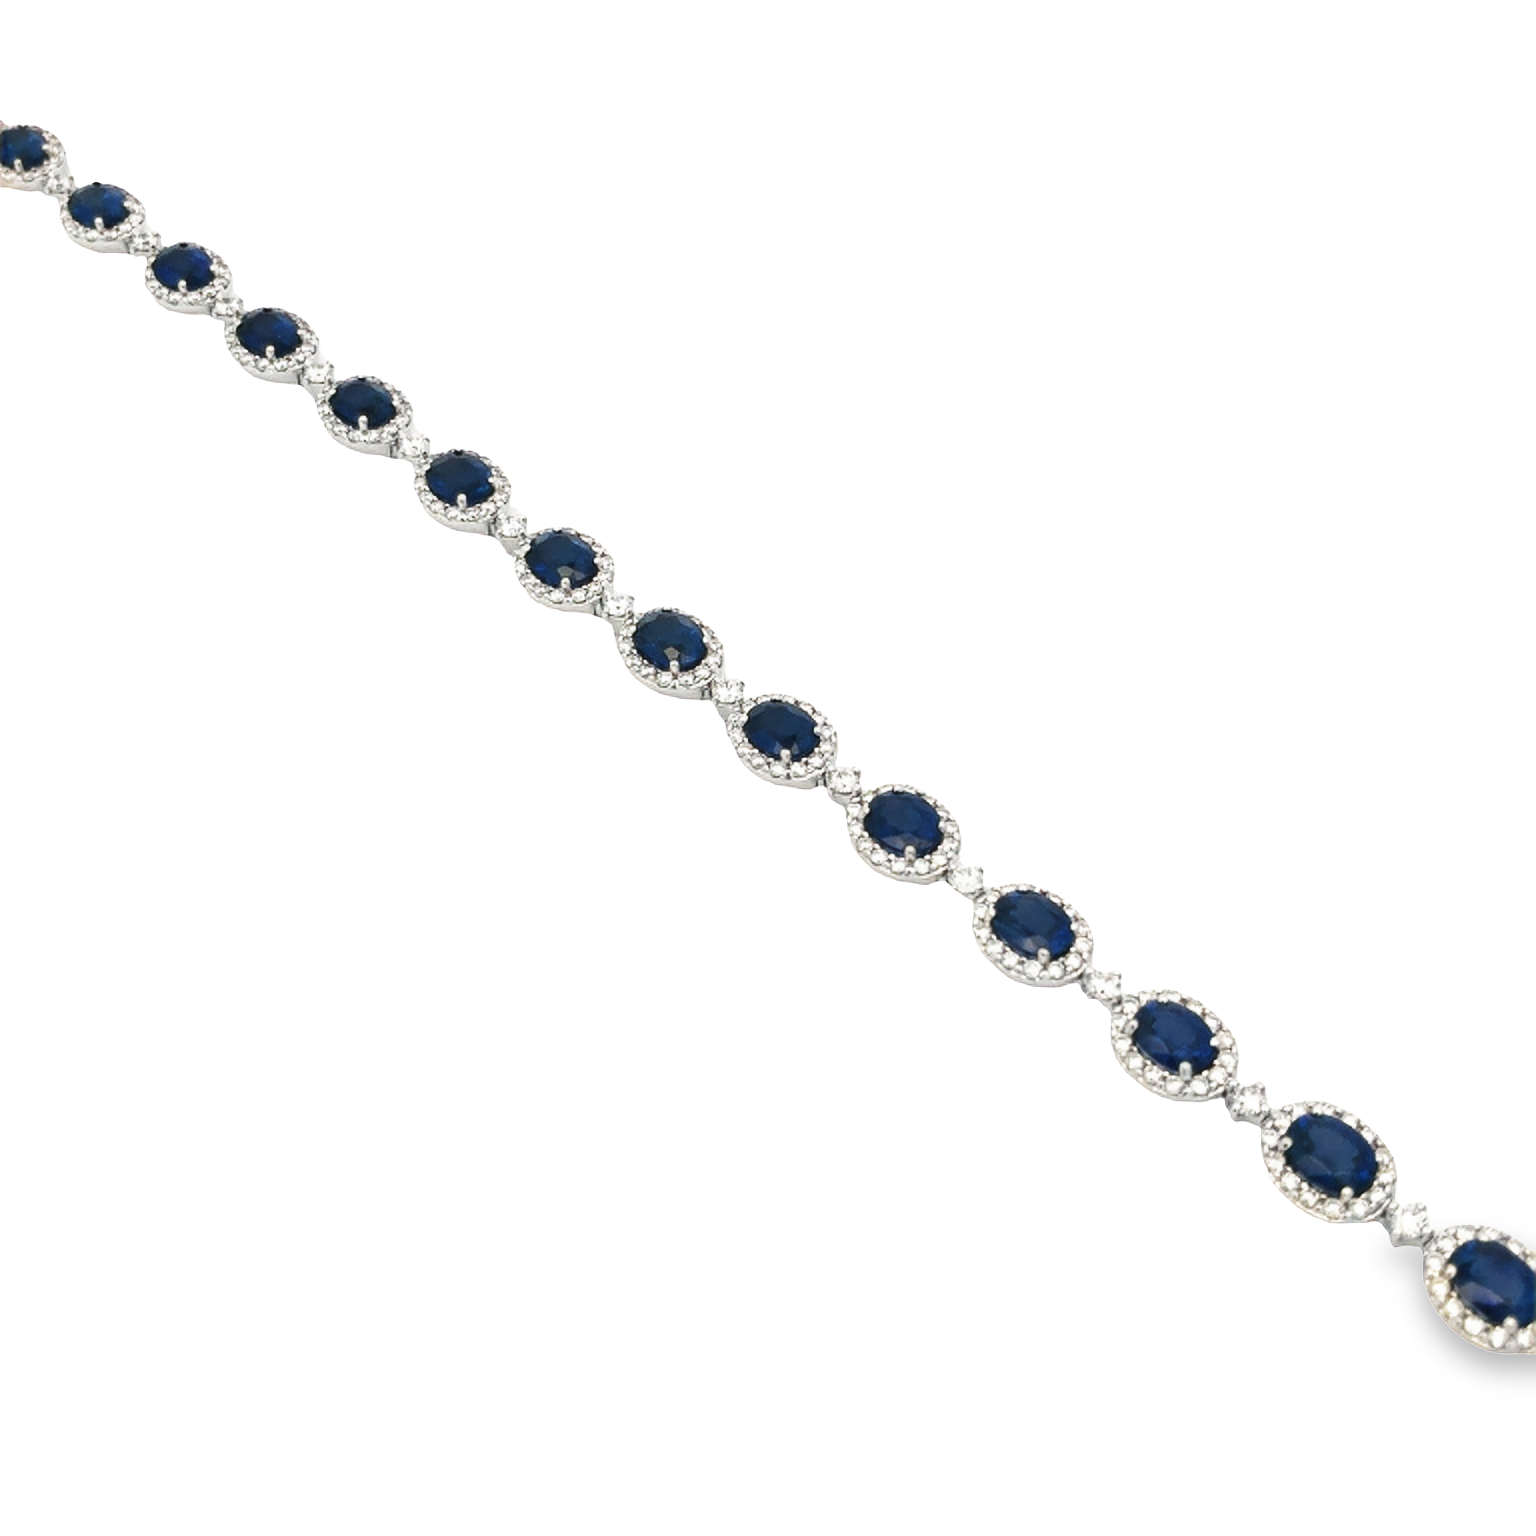 18K White Gold Sapphire and Diamond Bracelet with 17 Oval Sapphires